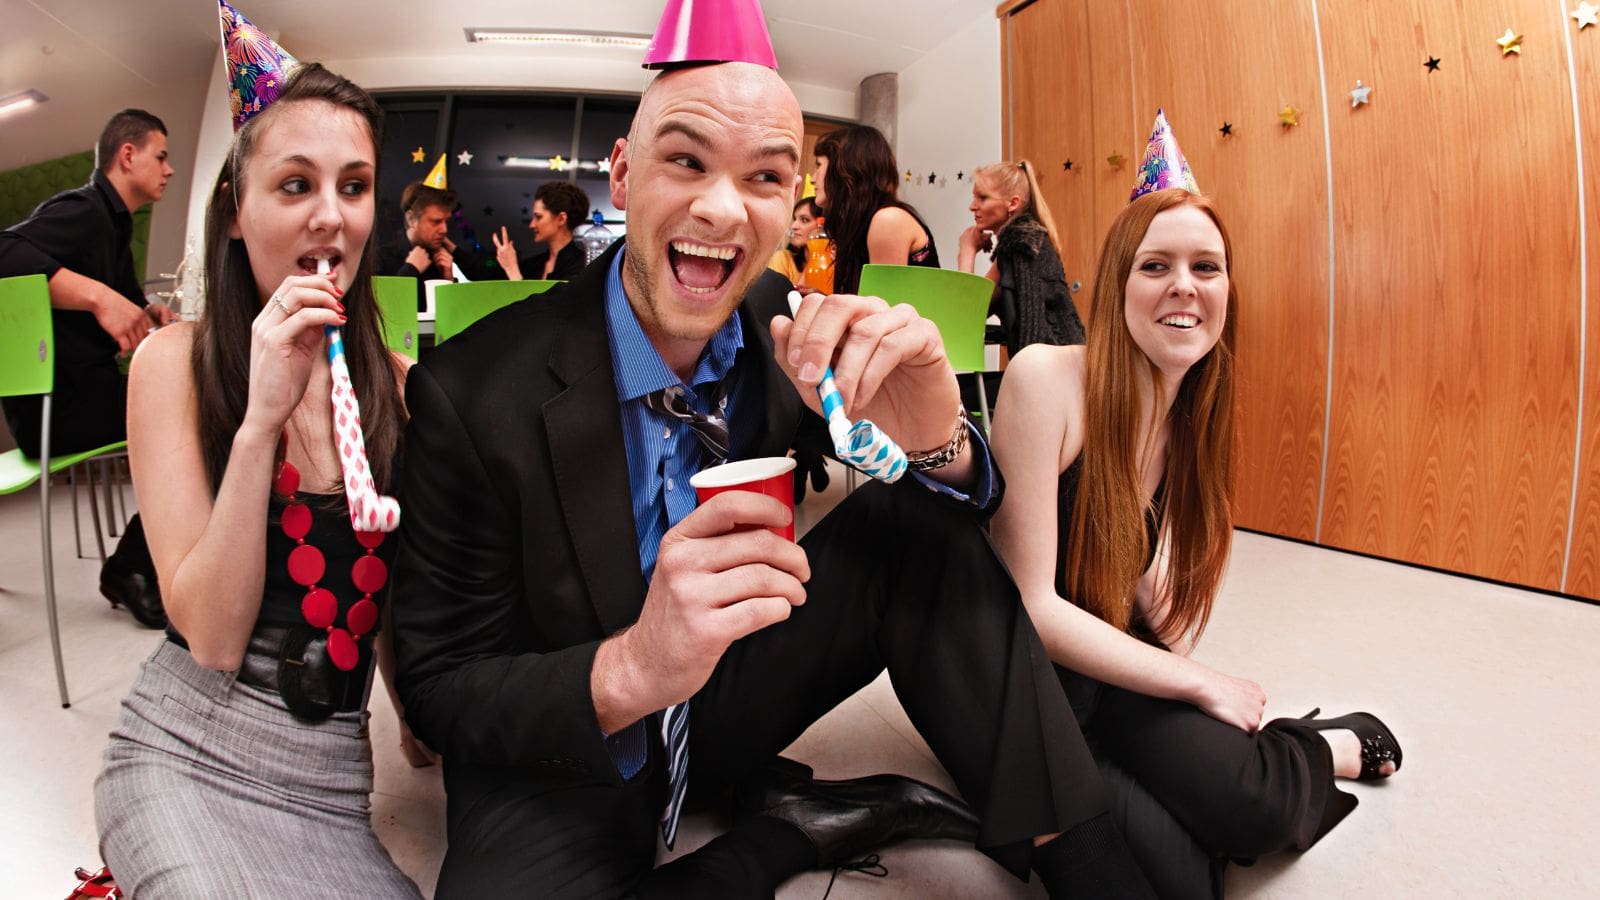 Hilarious accounting jokes & puns for your next office party